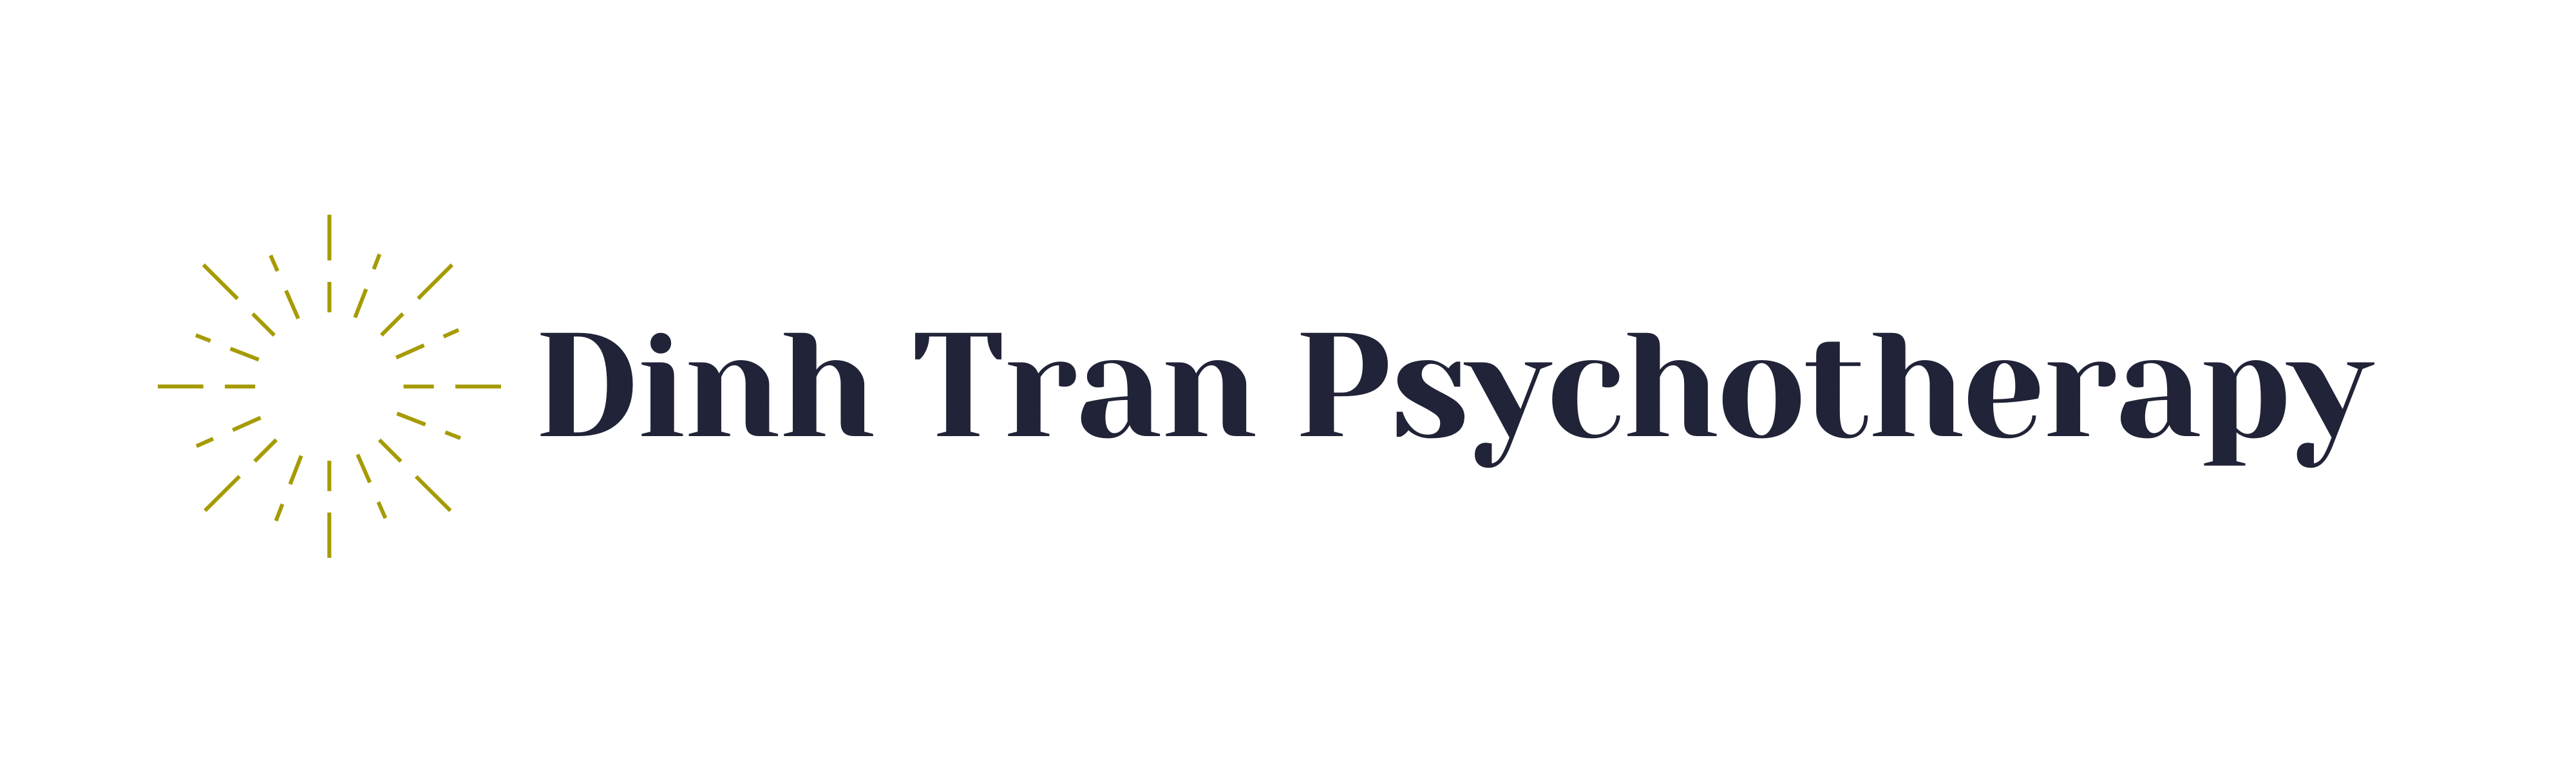 Dinh Tran Psychotherapy